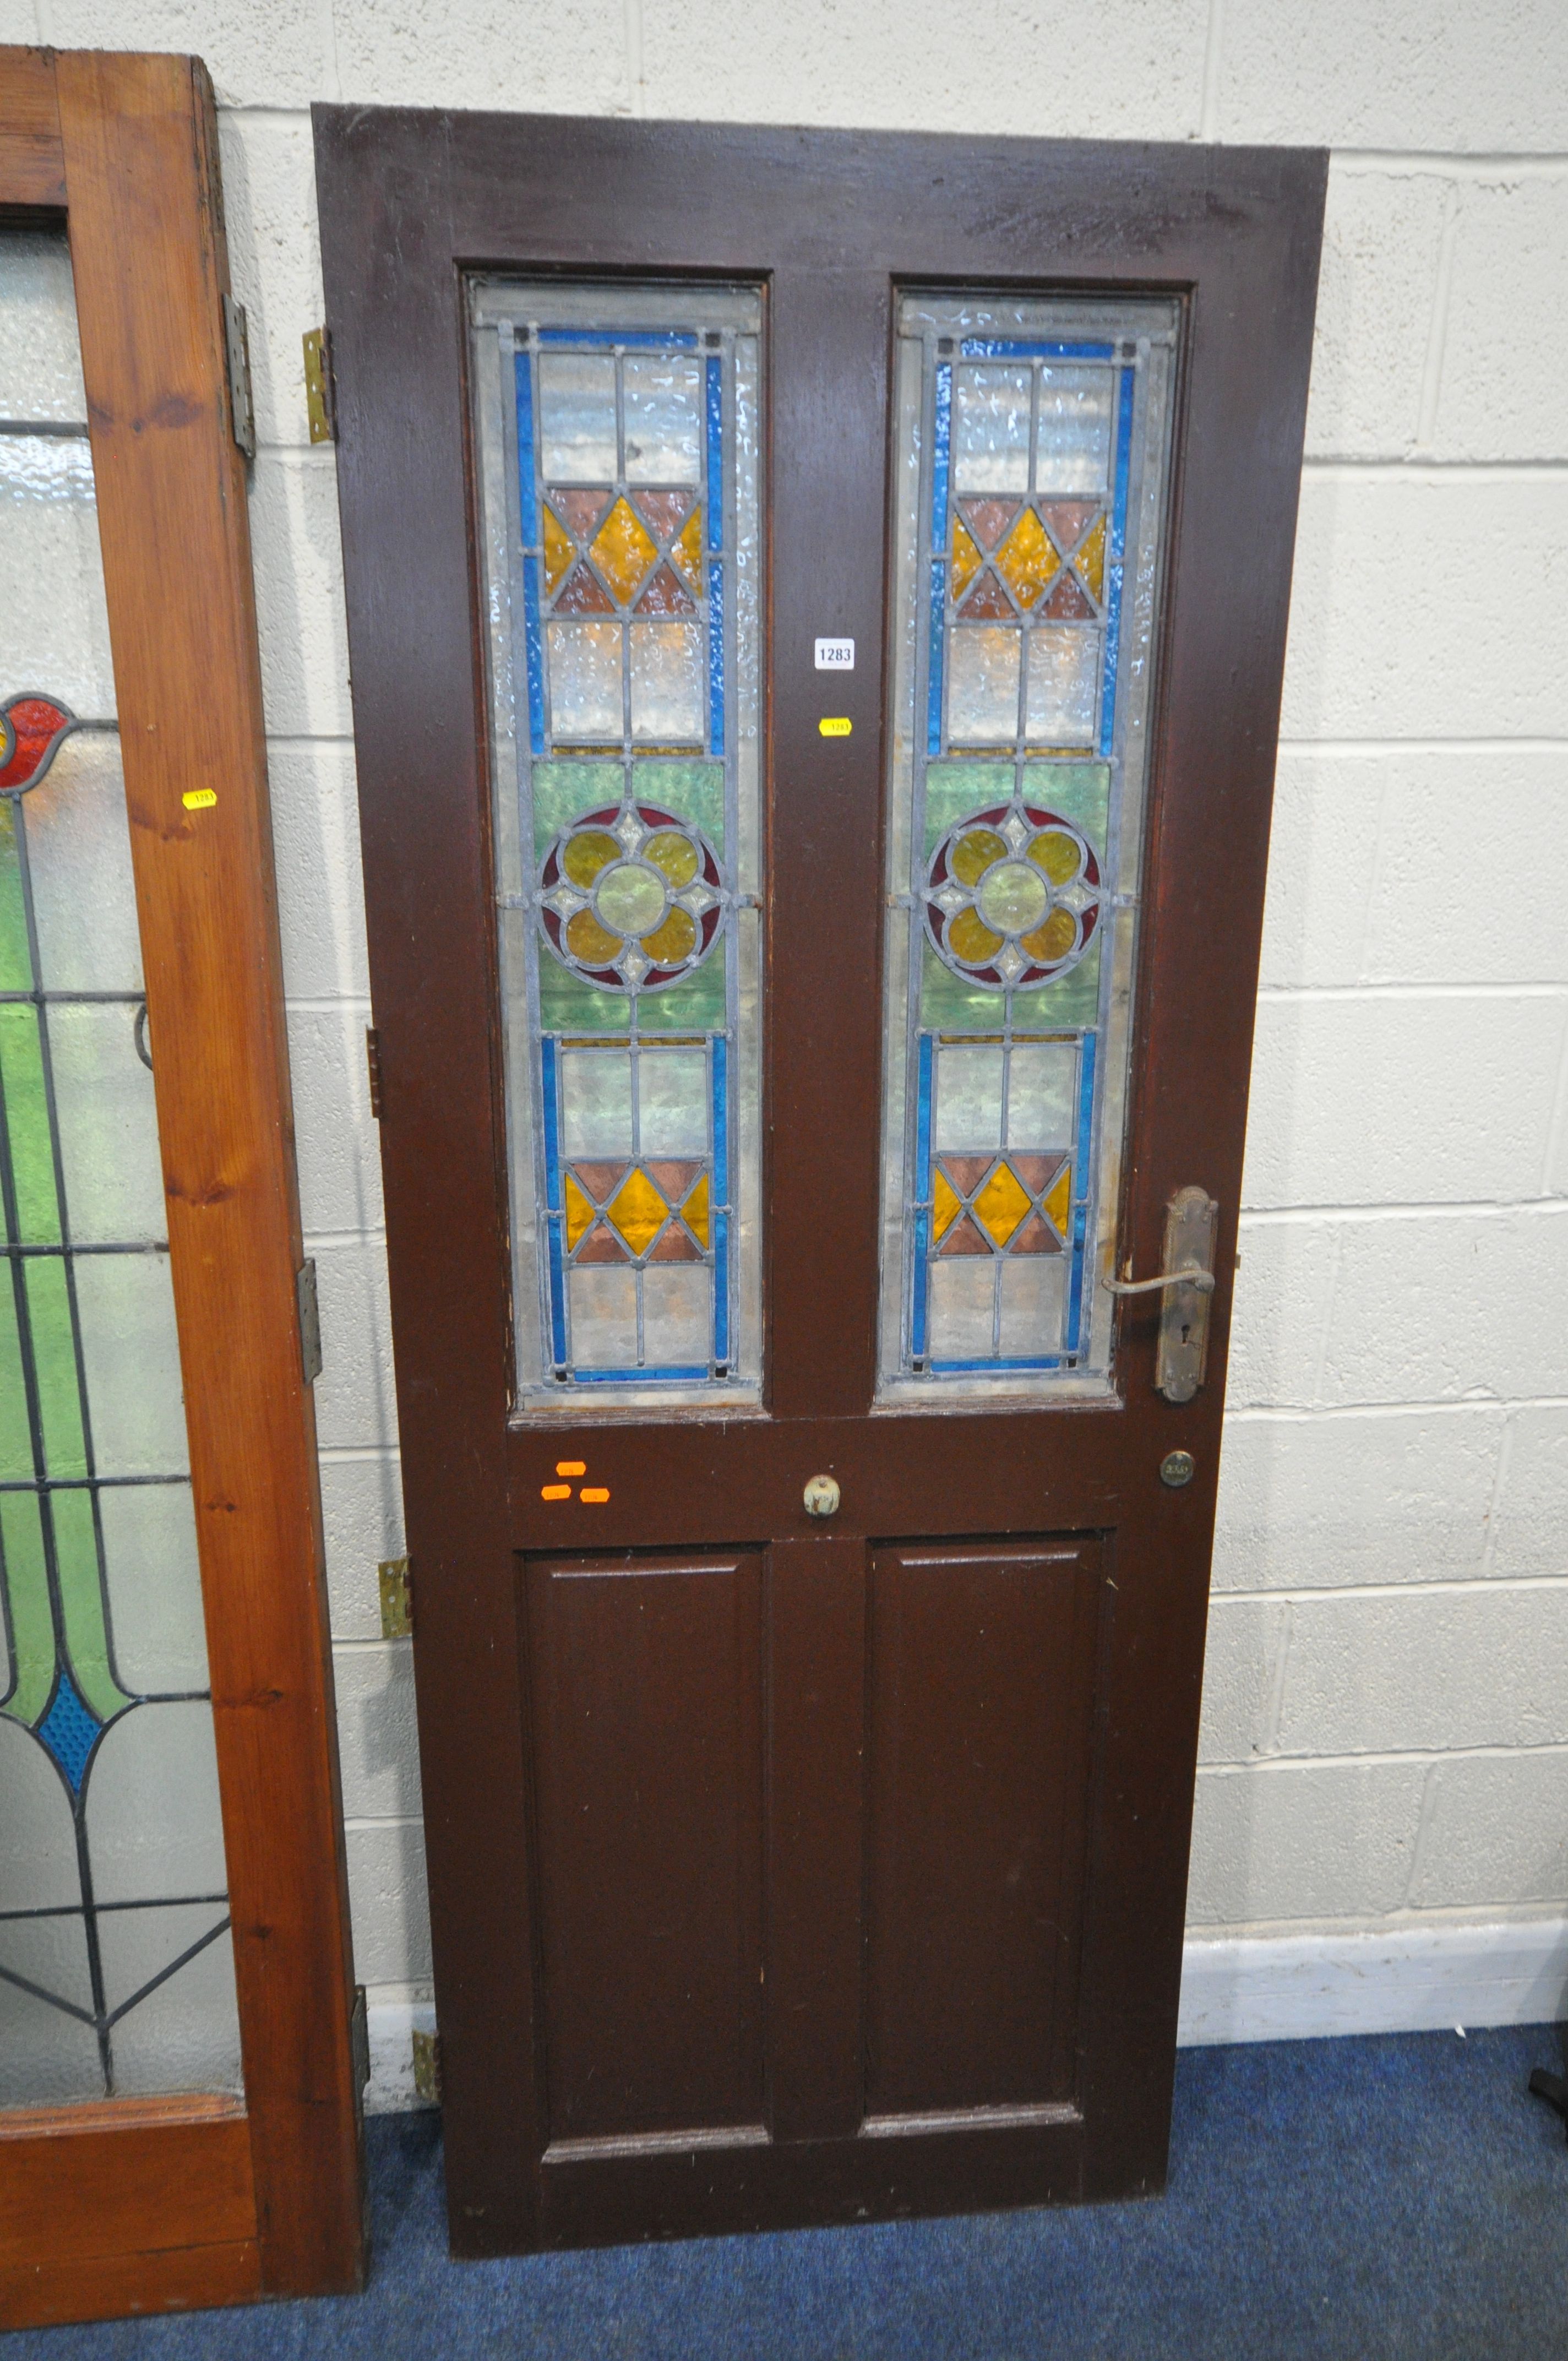 FOUR SIZED INTERNAL DOORS, each with lead glazed stain glass windows, depicting various patterns and - Image 5 of 10